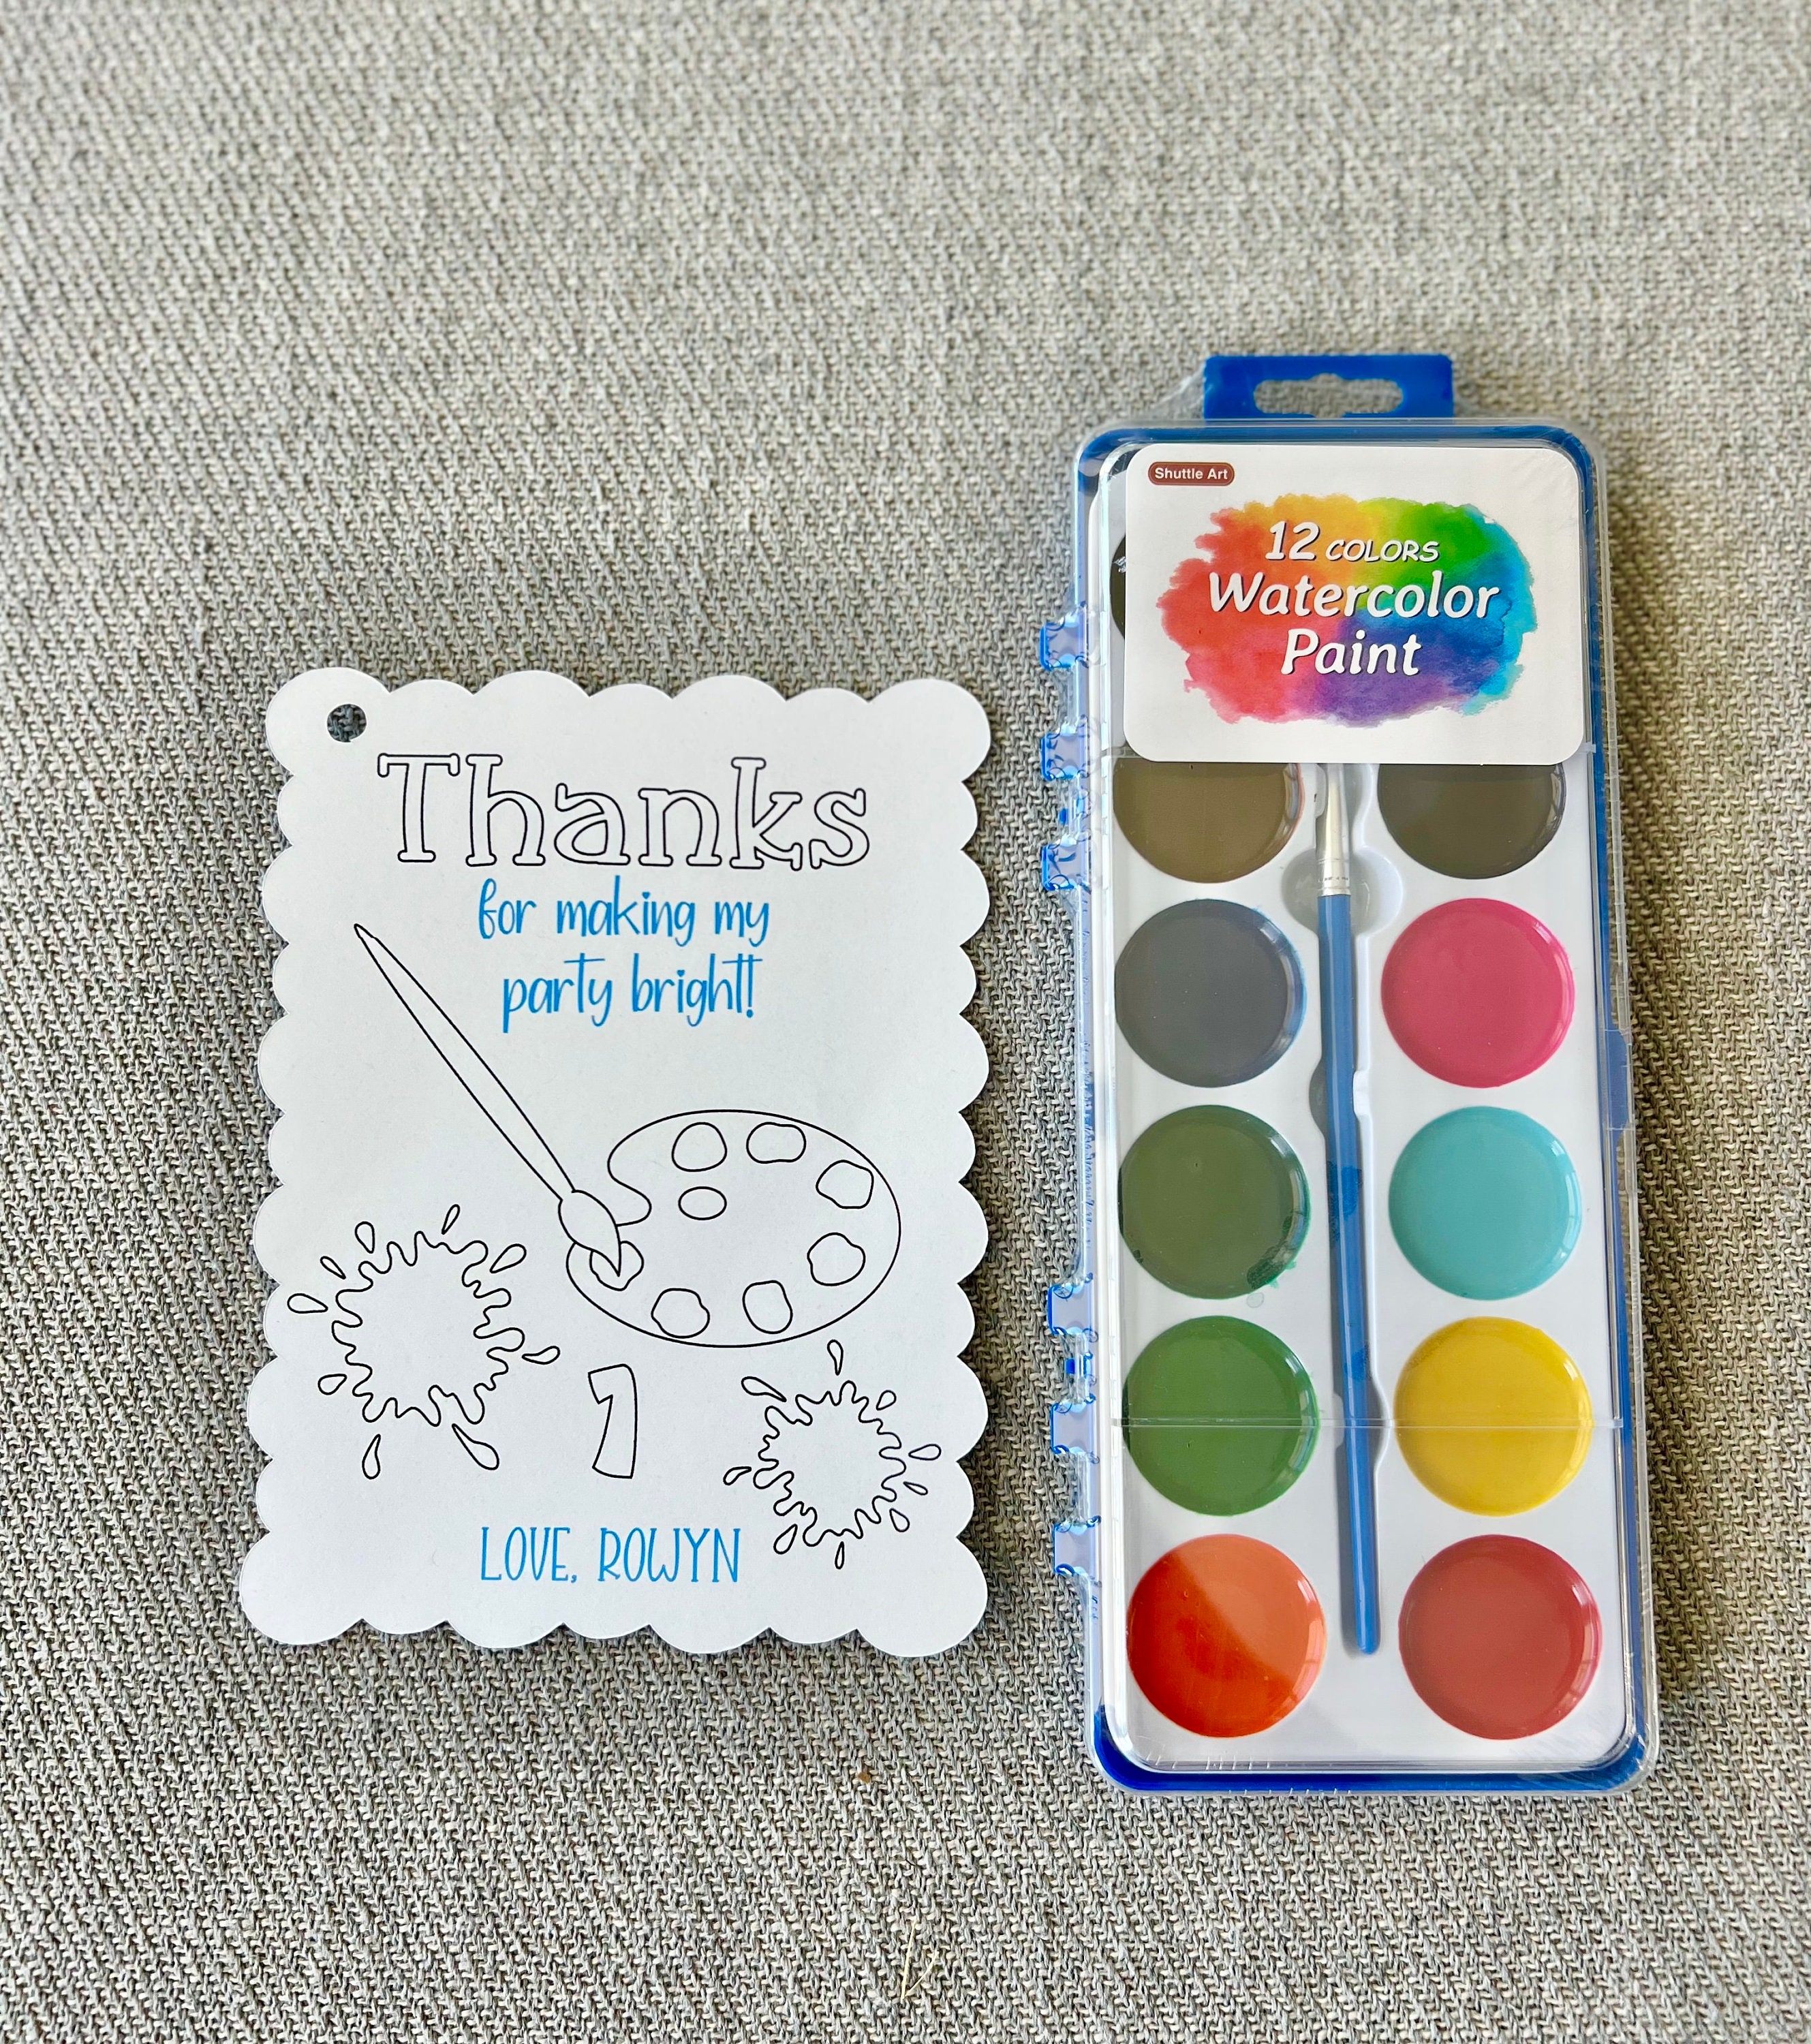 Rainbow Watercolor Party Favorspersonalized, Printed & Assembled Watercolor  Paint Set and Thank You Card 